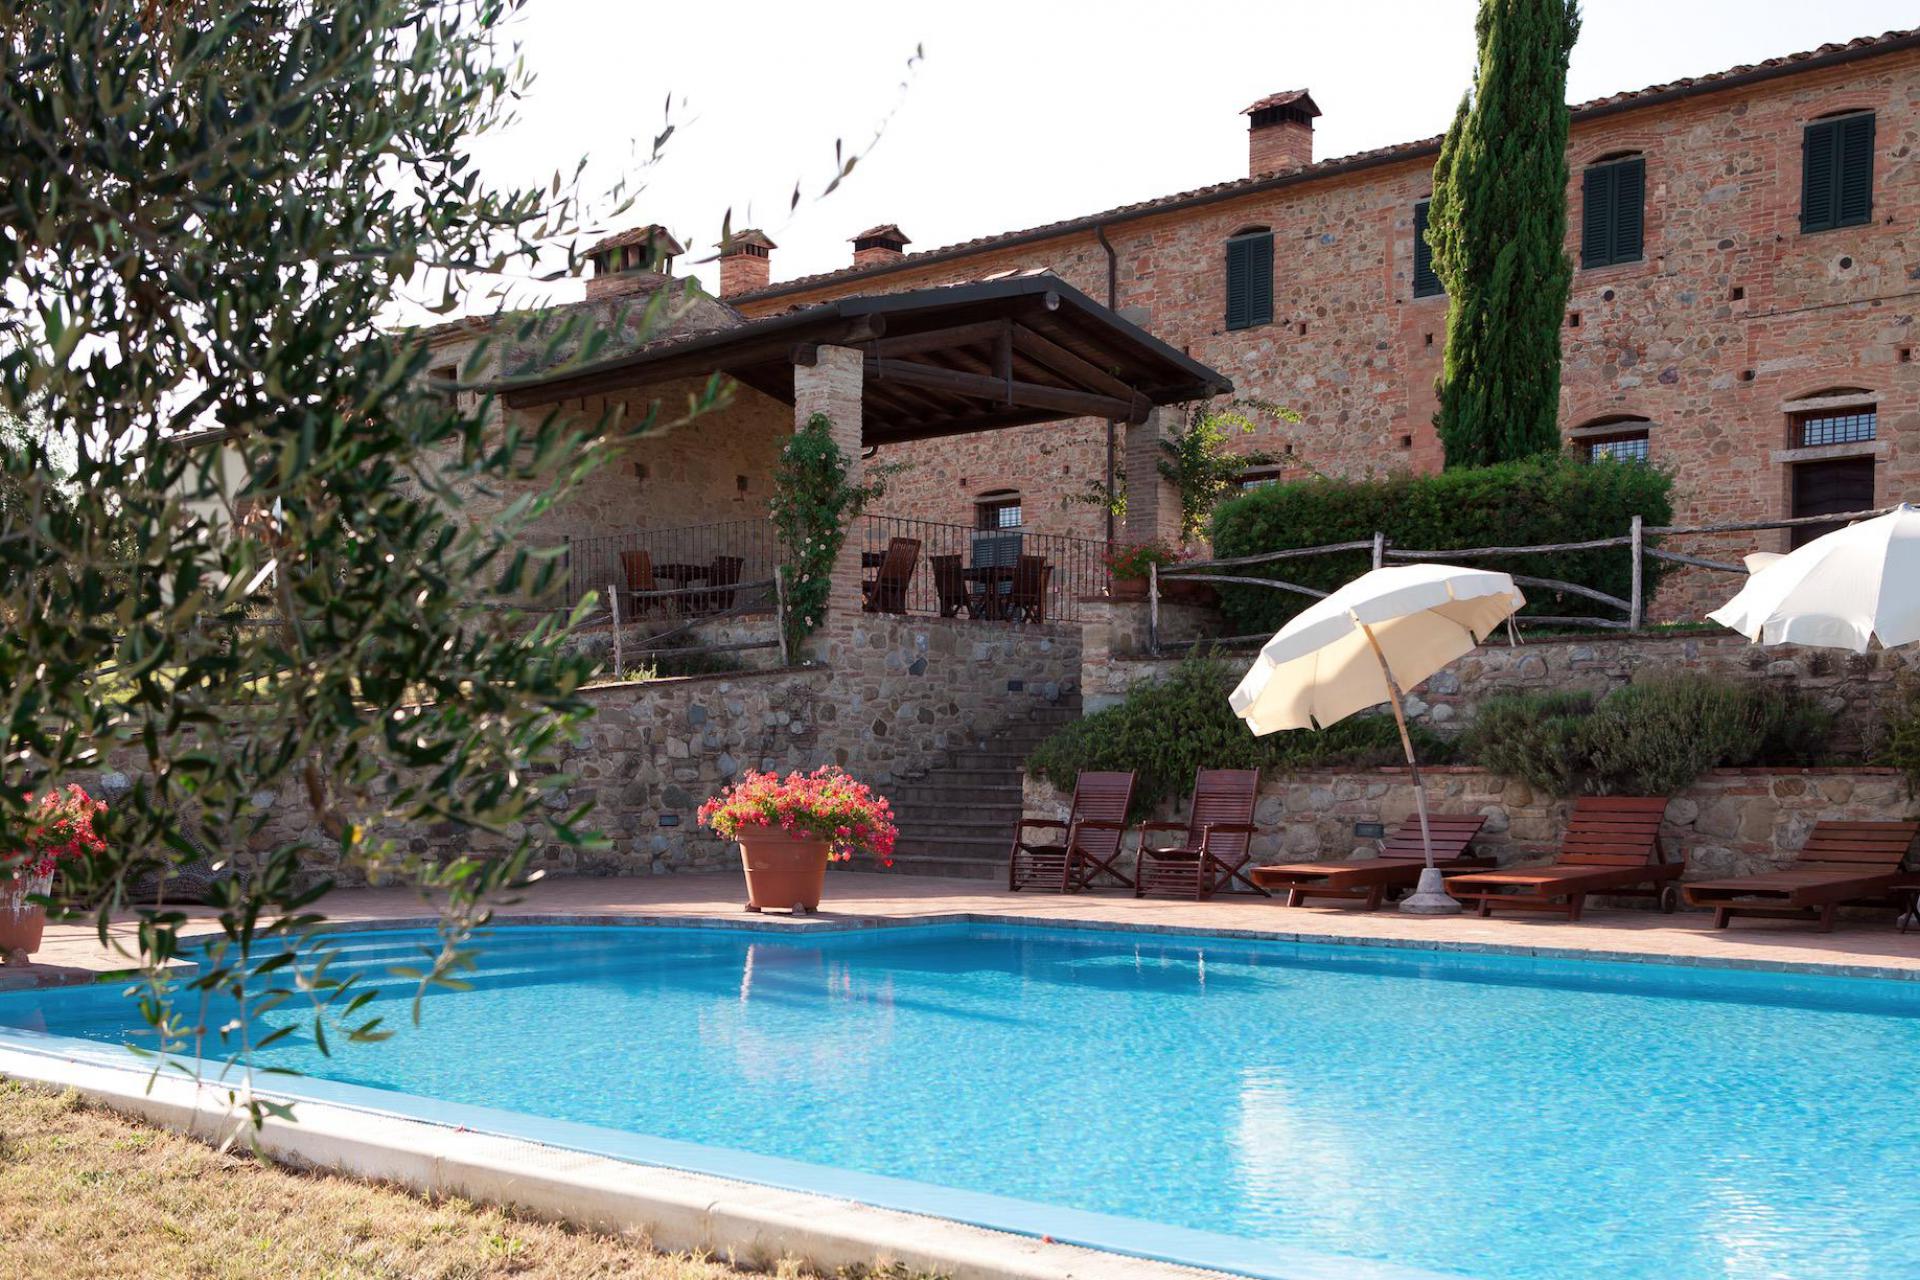 Agriturismo Tuscany Child-friendly agriturismo in Tuscany with pizza night